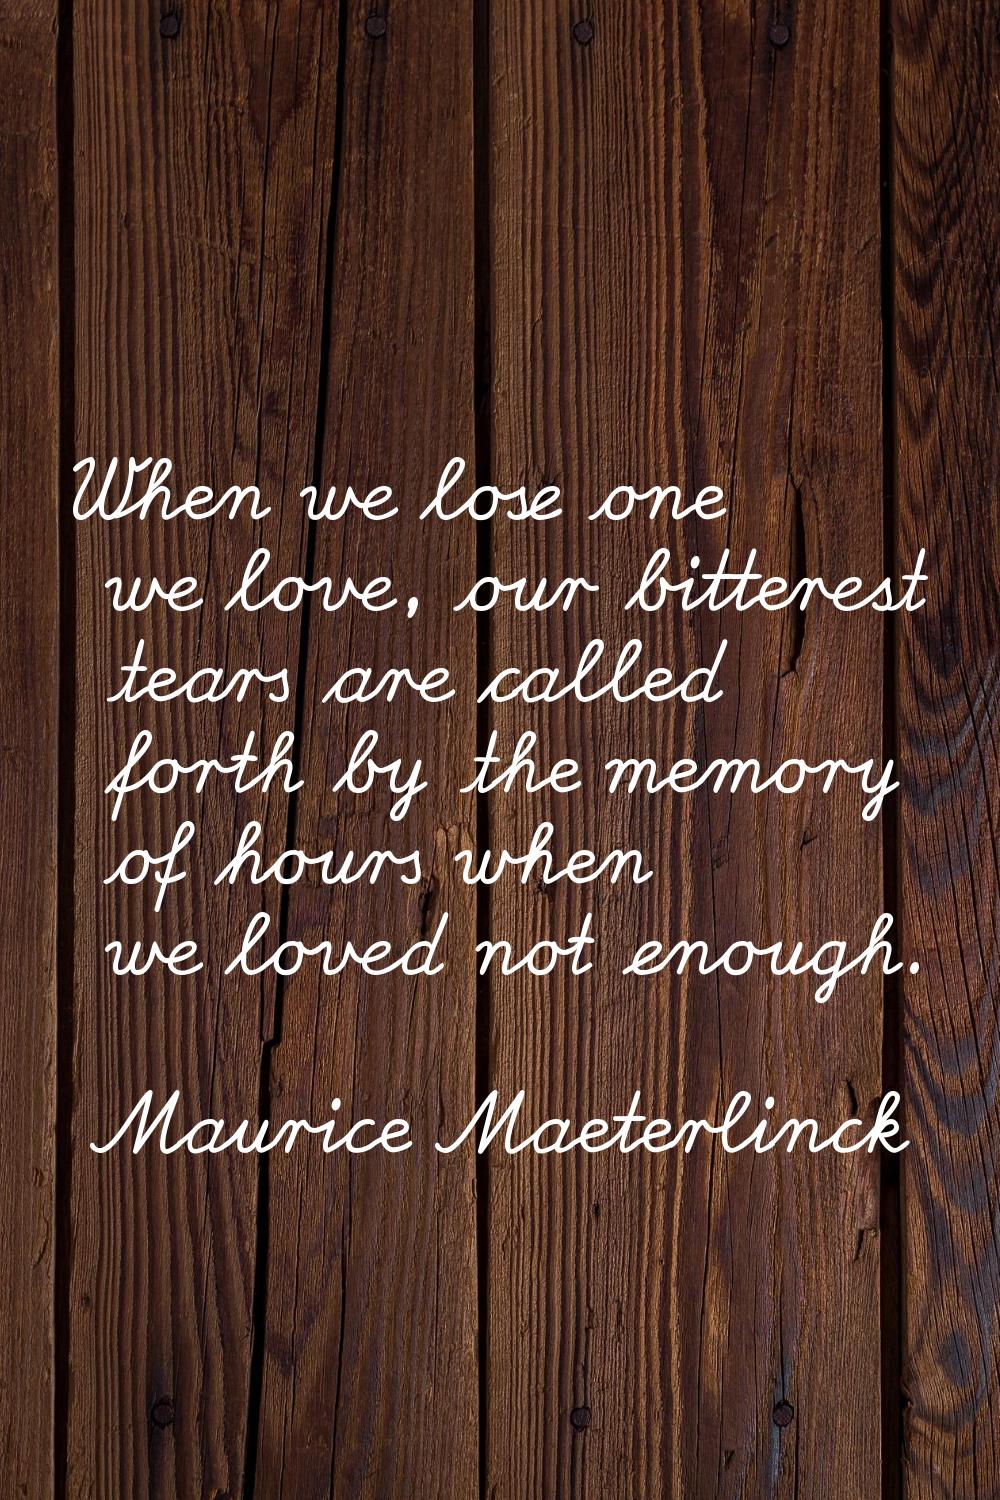 When we lose one we love, our bitterest tears are called forth by the memory of hours when we loved